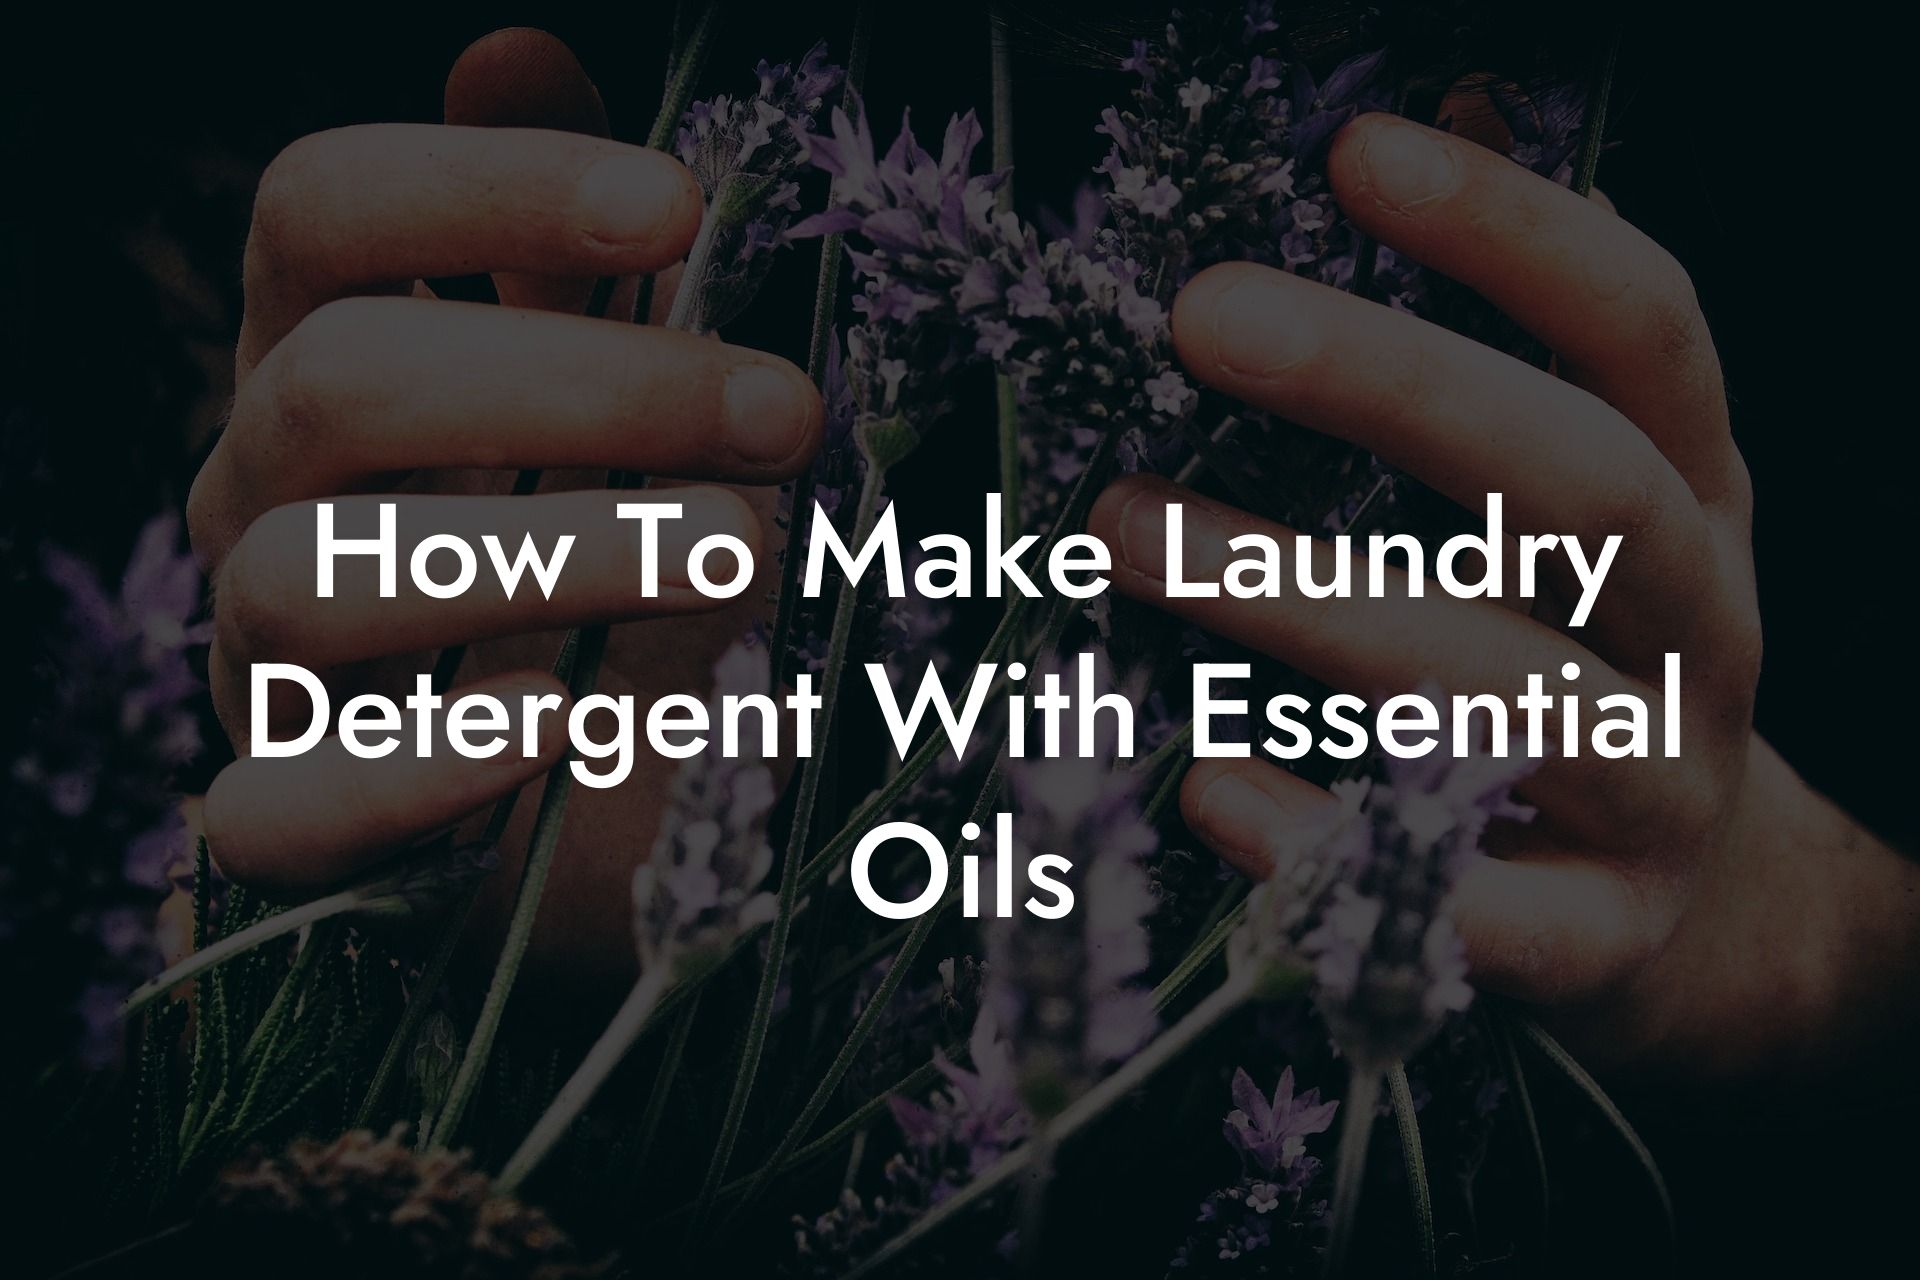 How To Make Laundry Detergent With Essential Oils